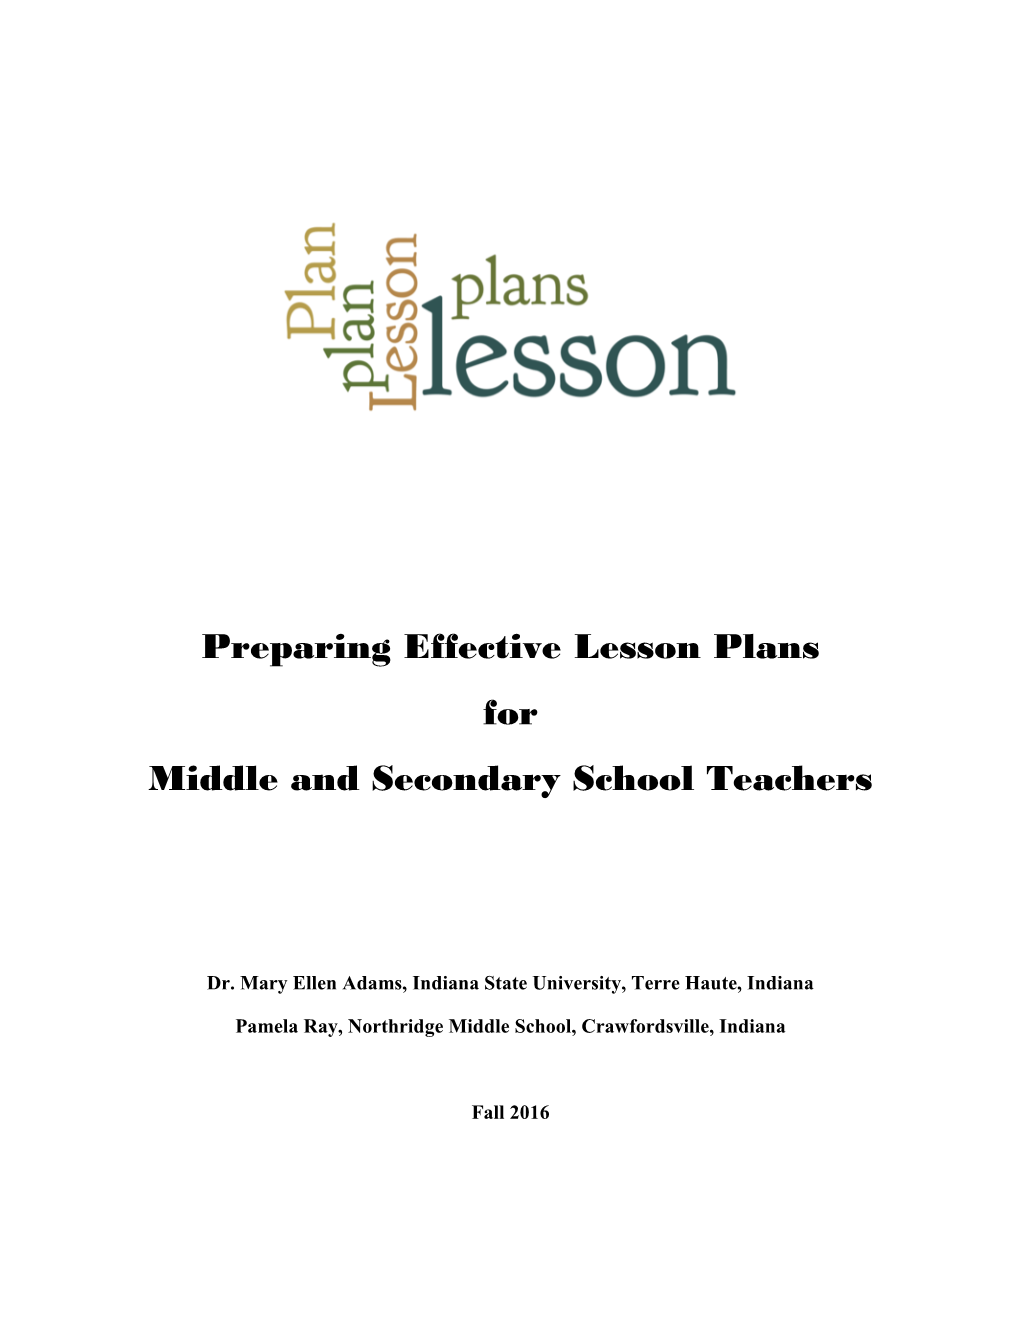 Preparing Effective Lesson Plans for Middle and Secondary School Teachers